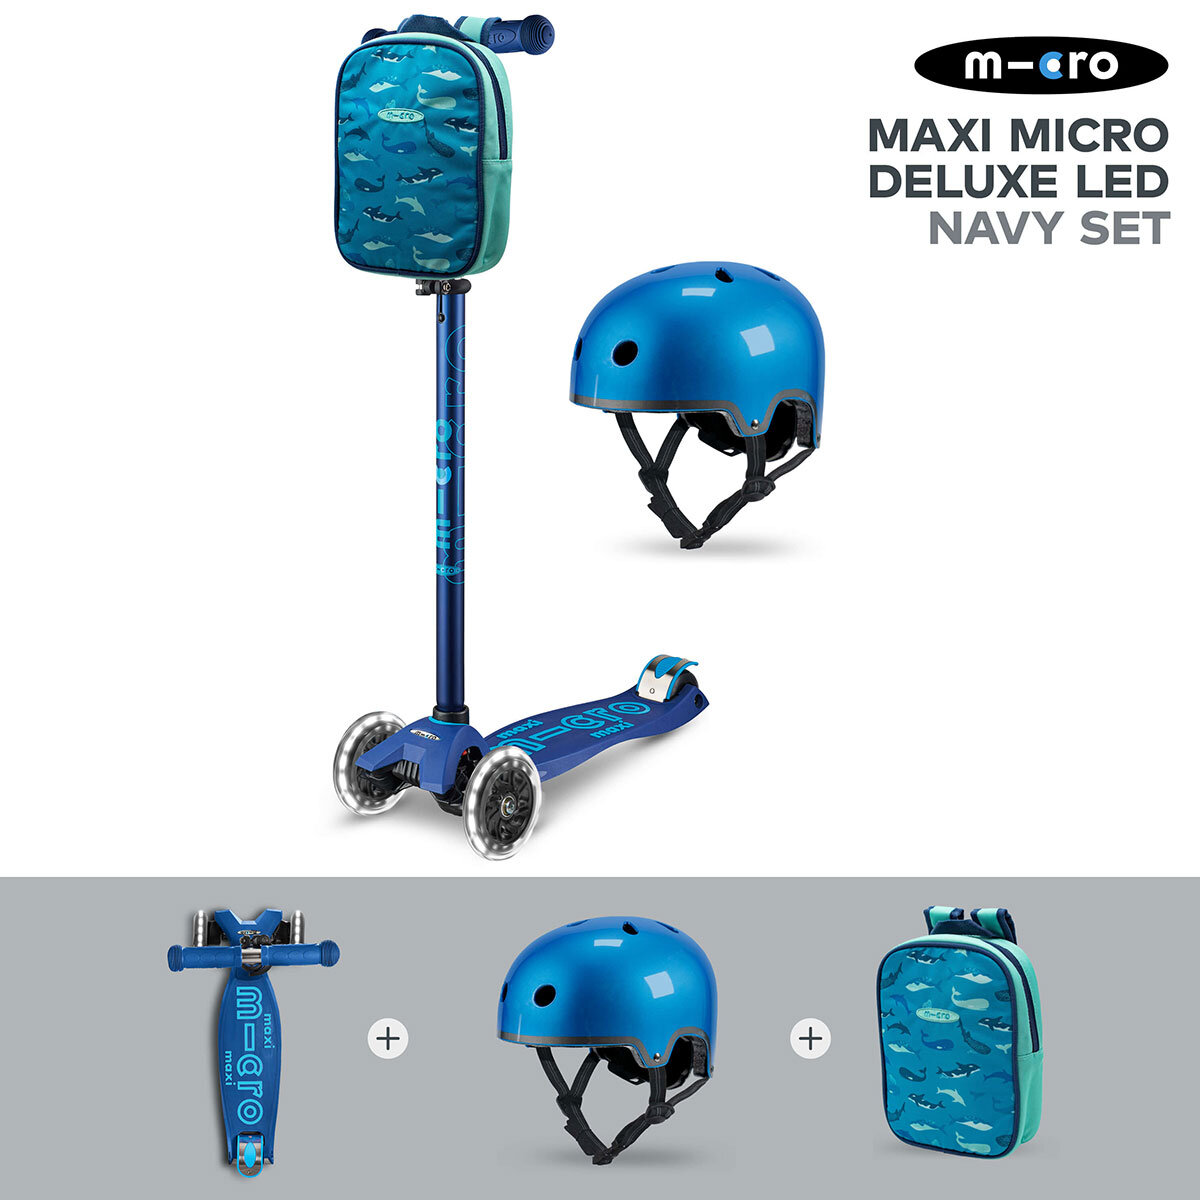 Micro Maxi Deluxe LED Navy Scooter with Blue Helmet and Sealife Lunch Bag (5+ Years) 